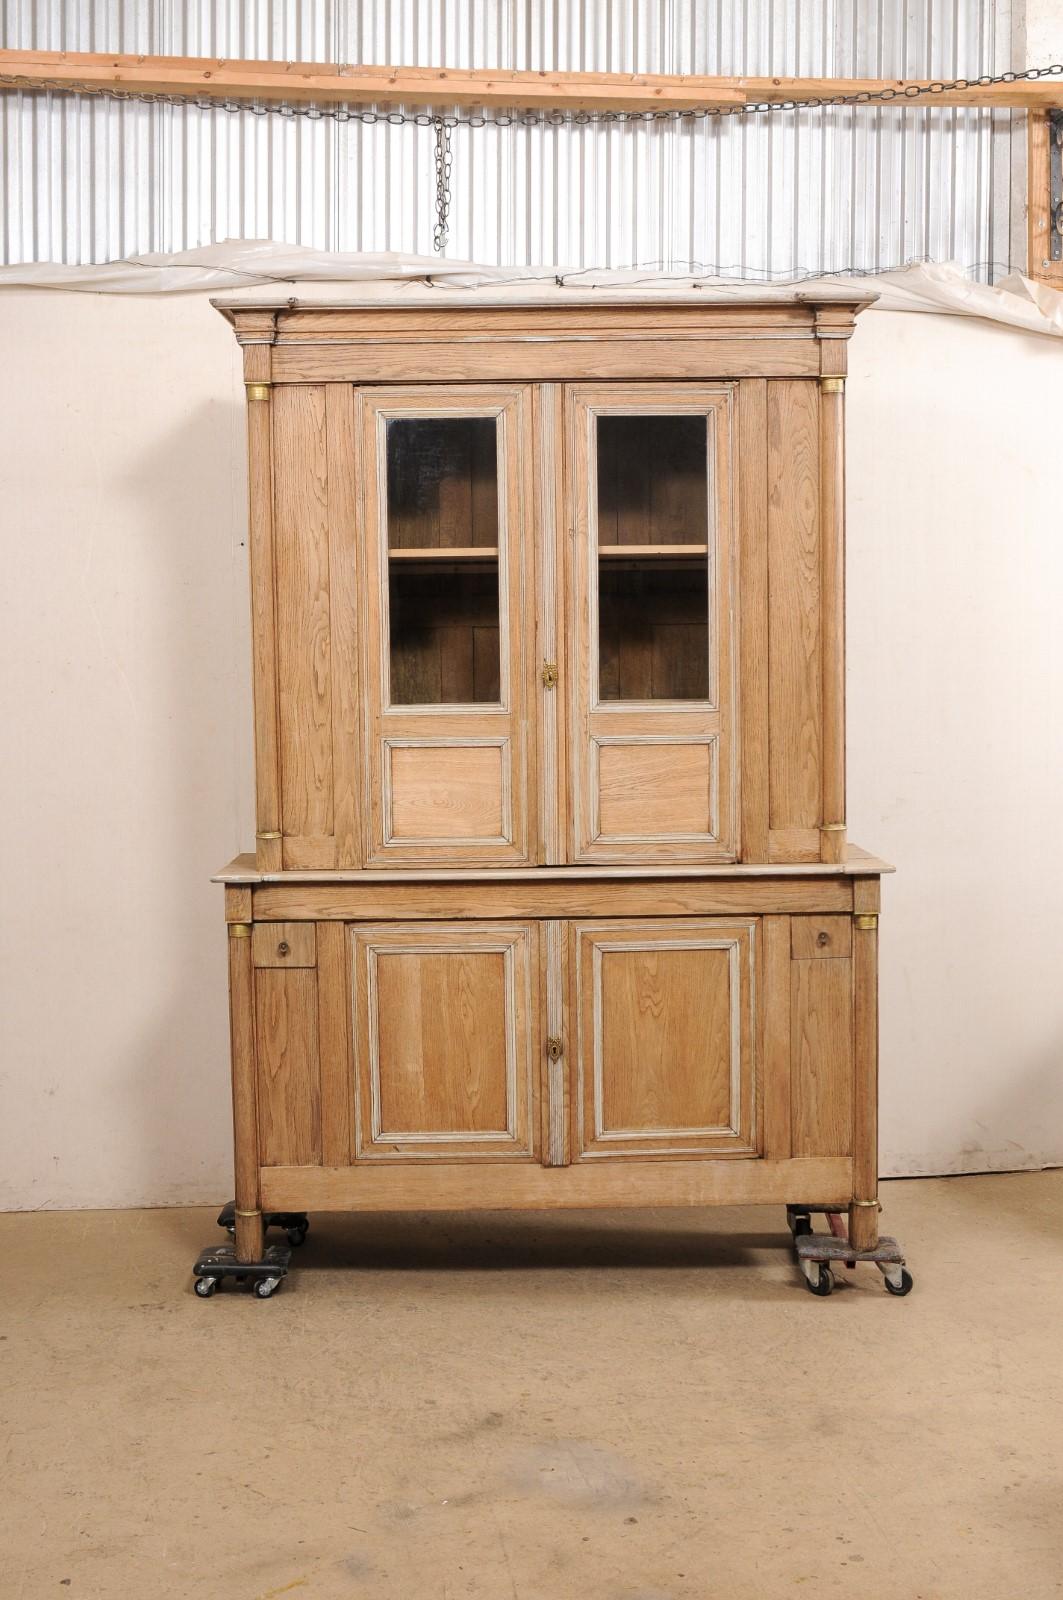 A French Neoclassical tall bleached-oak display and storage cabinet from the mid 19th century. This handsome cabinet from France, often referred to as a buffet à deux-corps (which is the name for a French buffet consisting of an upper and lower